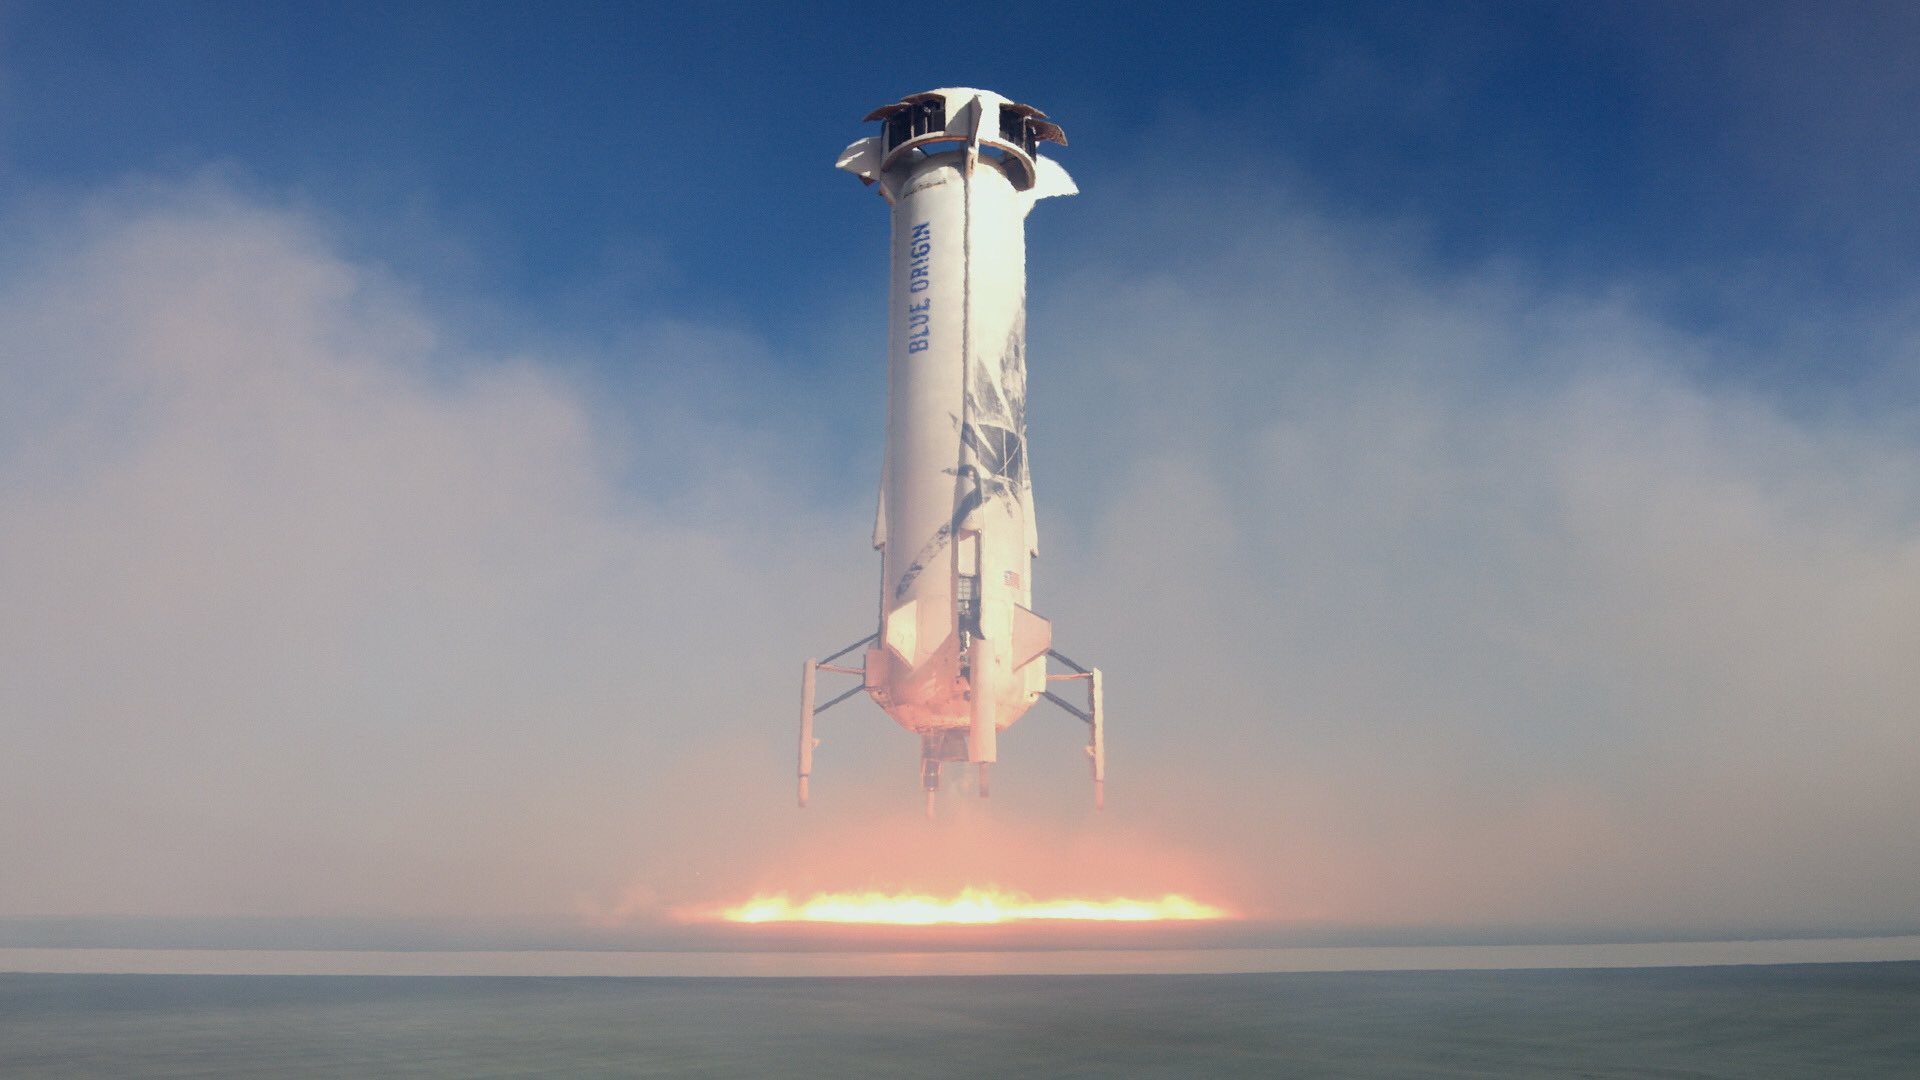 They're attacking Blue Origin's business culture and the safety of New Shepard once again